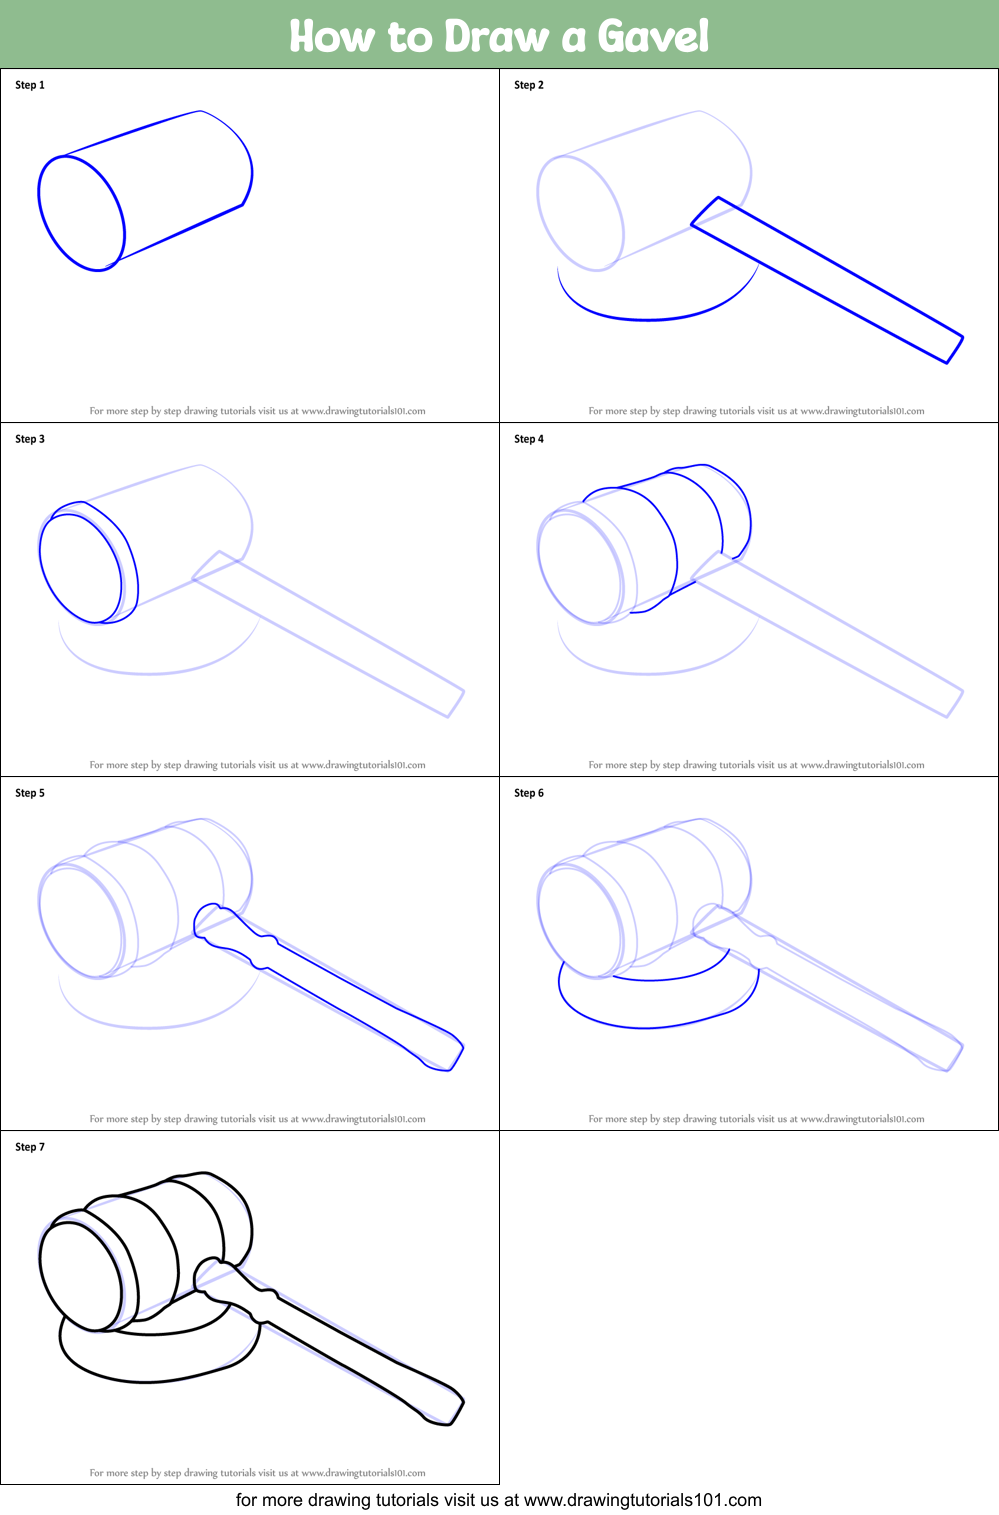 Best How To Draw A Gavel of all time Learn more here 